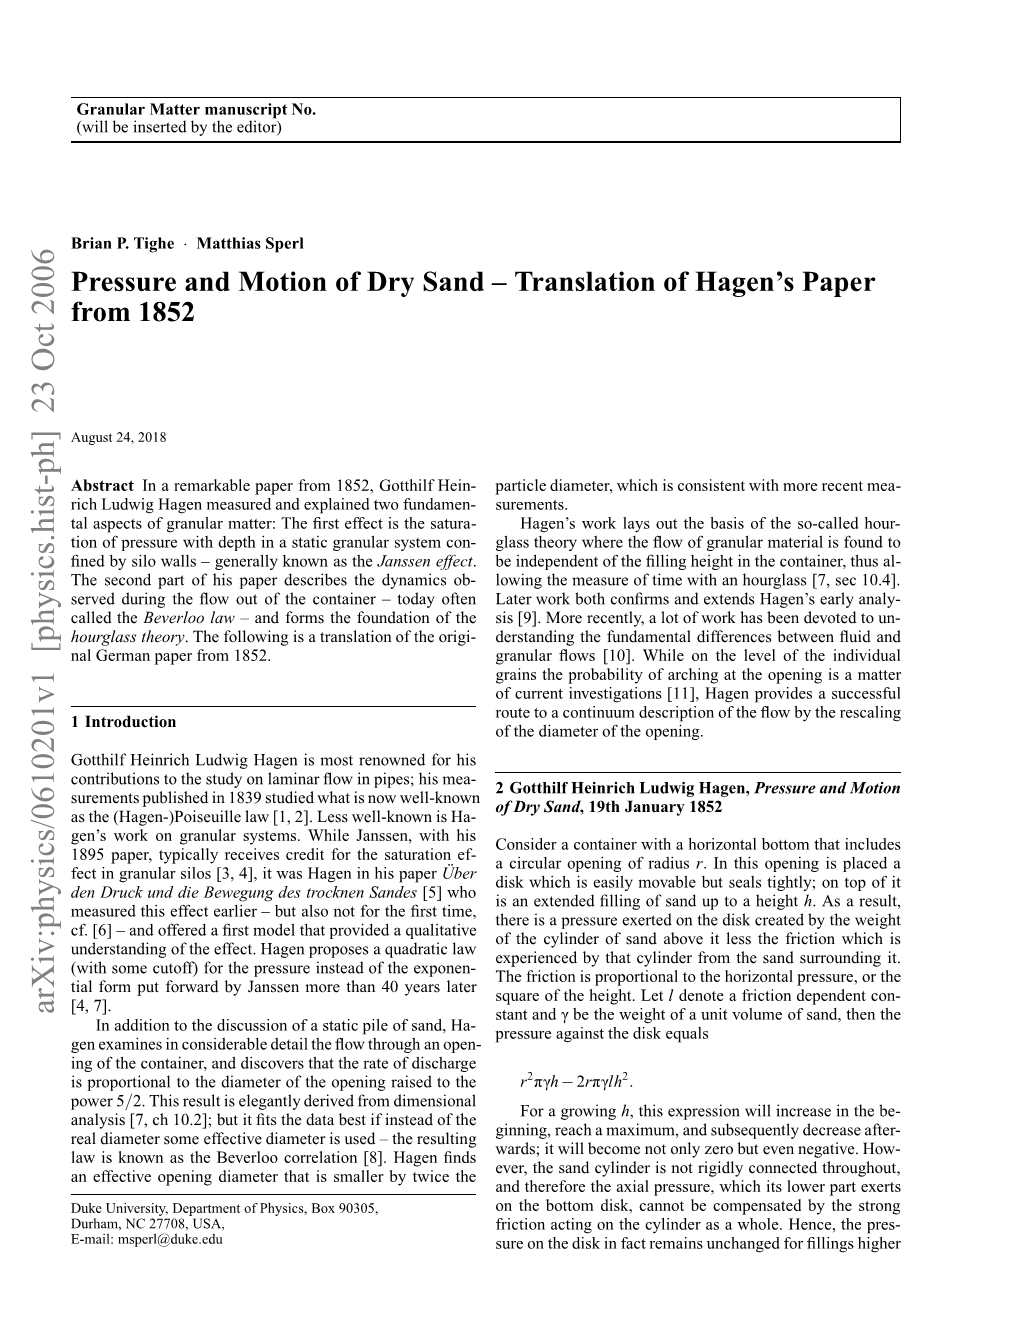 Pressure and Motion of Dry Sand – Translation of Hagen's Paper From